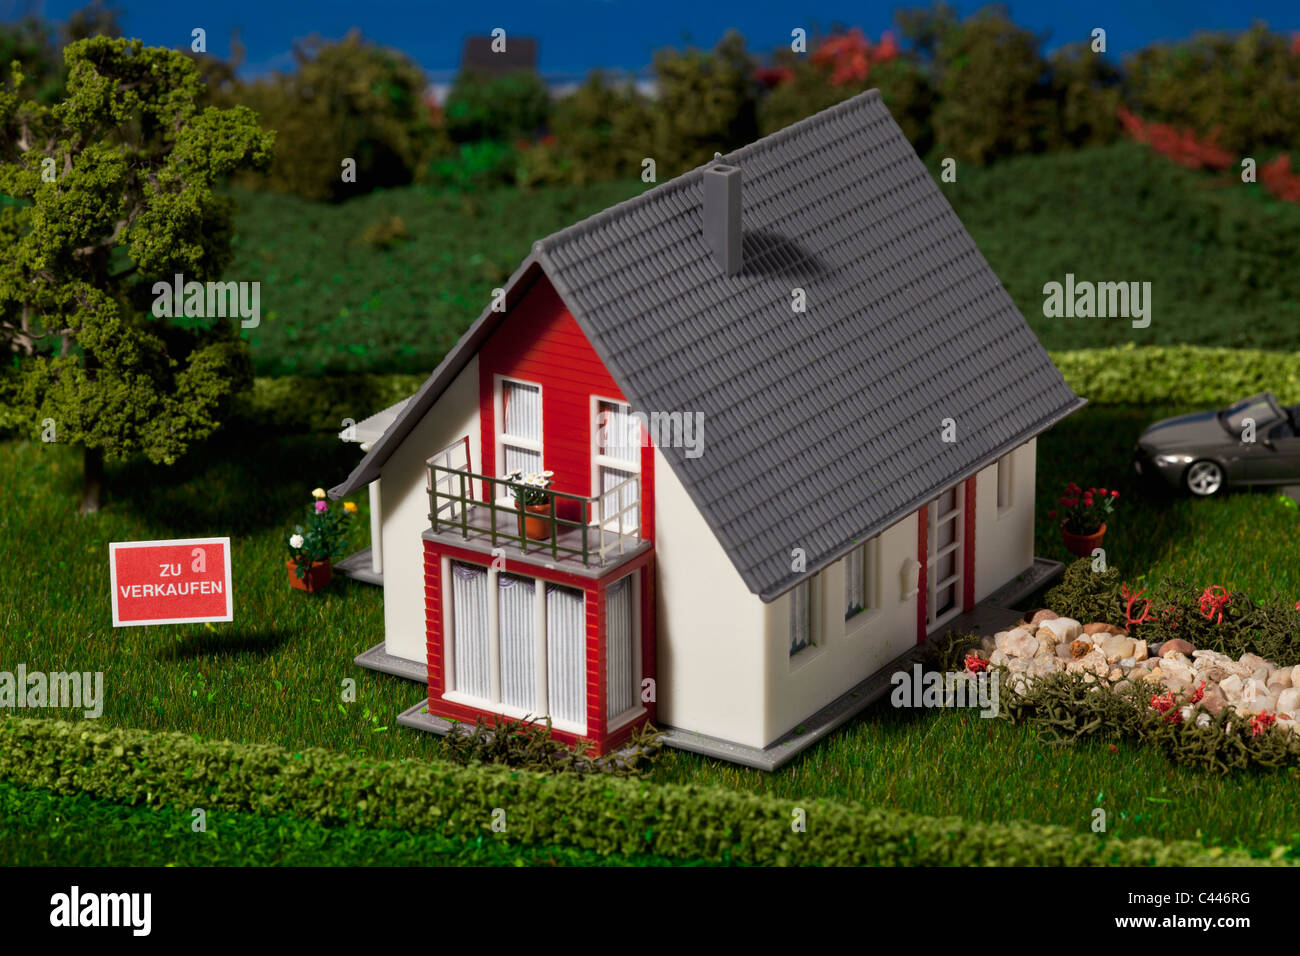 A diorama of a miniature house with a  ZU VERKAUFEN (for sale in German) sign Stock Photo